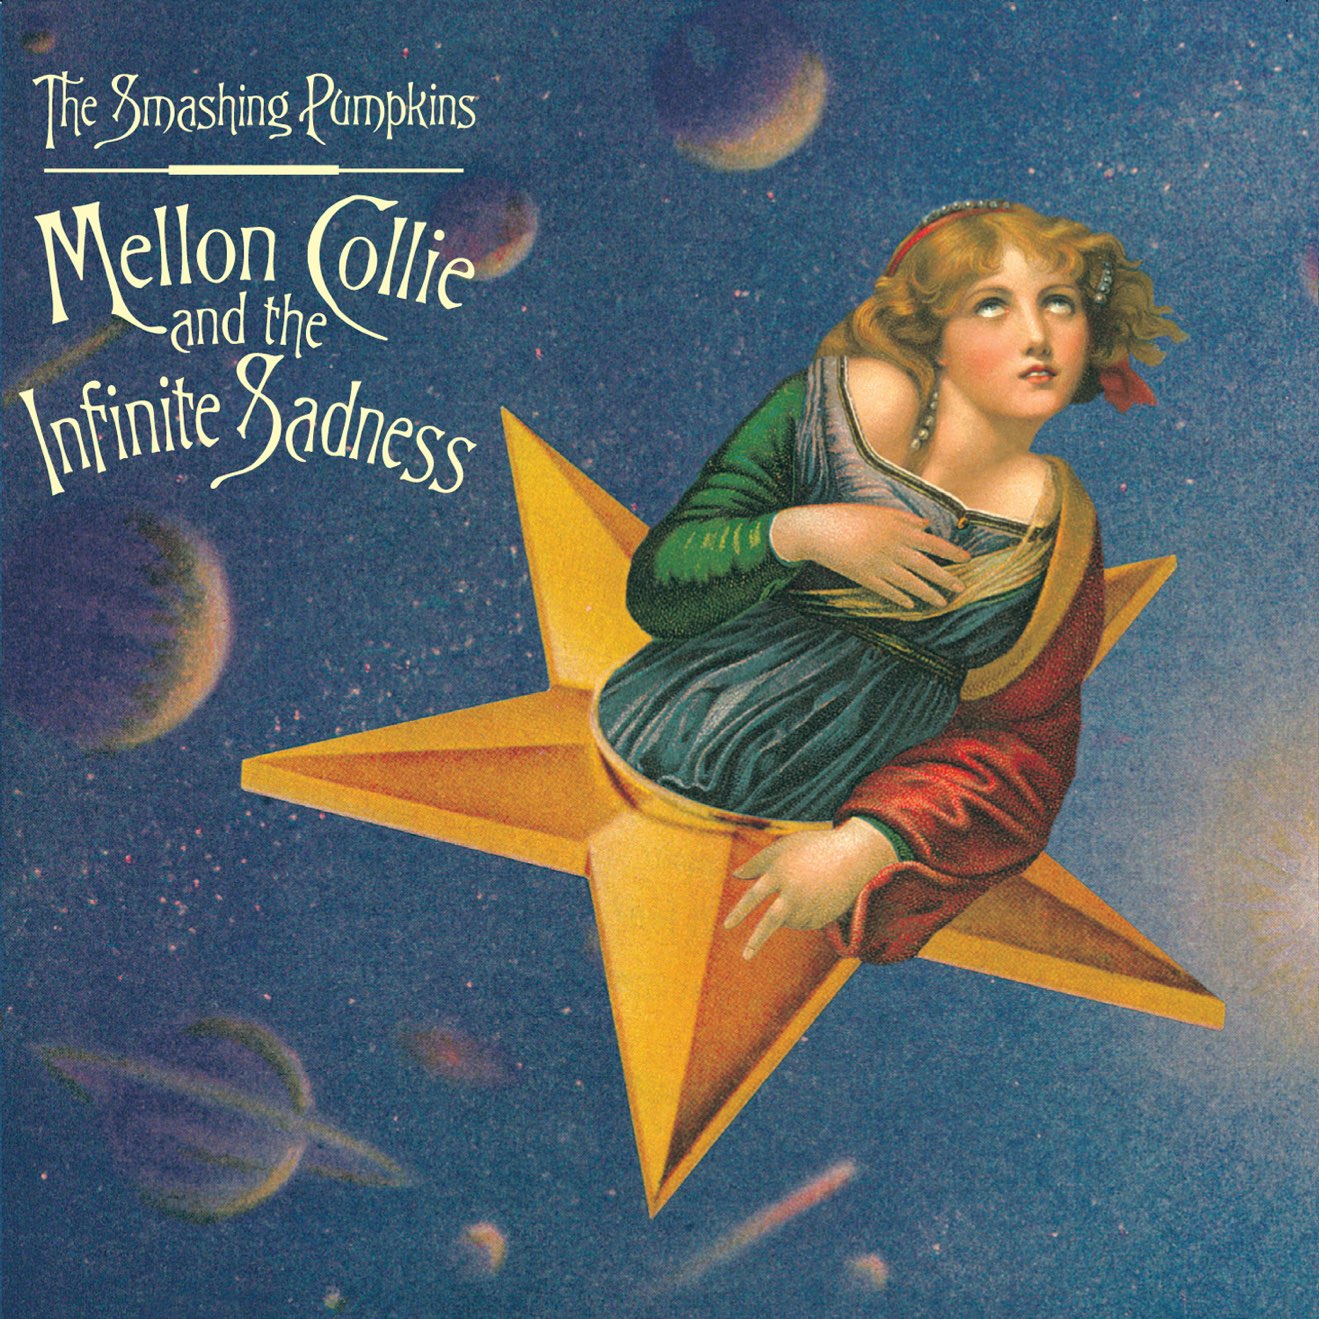 The Smashing Pumpkins – Mellon Collie and the Infinite Sadness (Remastered) (2012) [iTunes Match M4A]